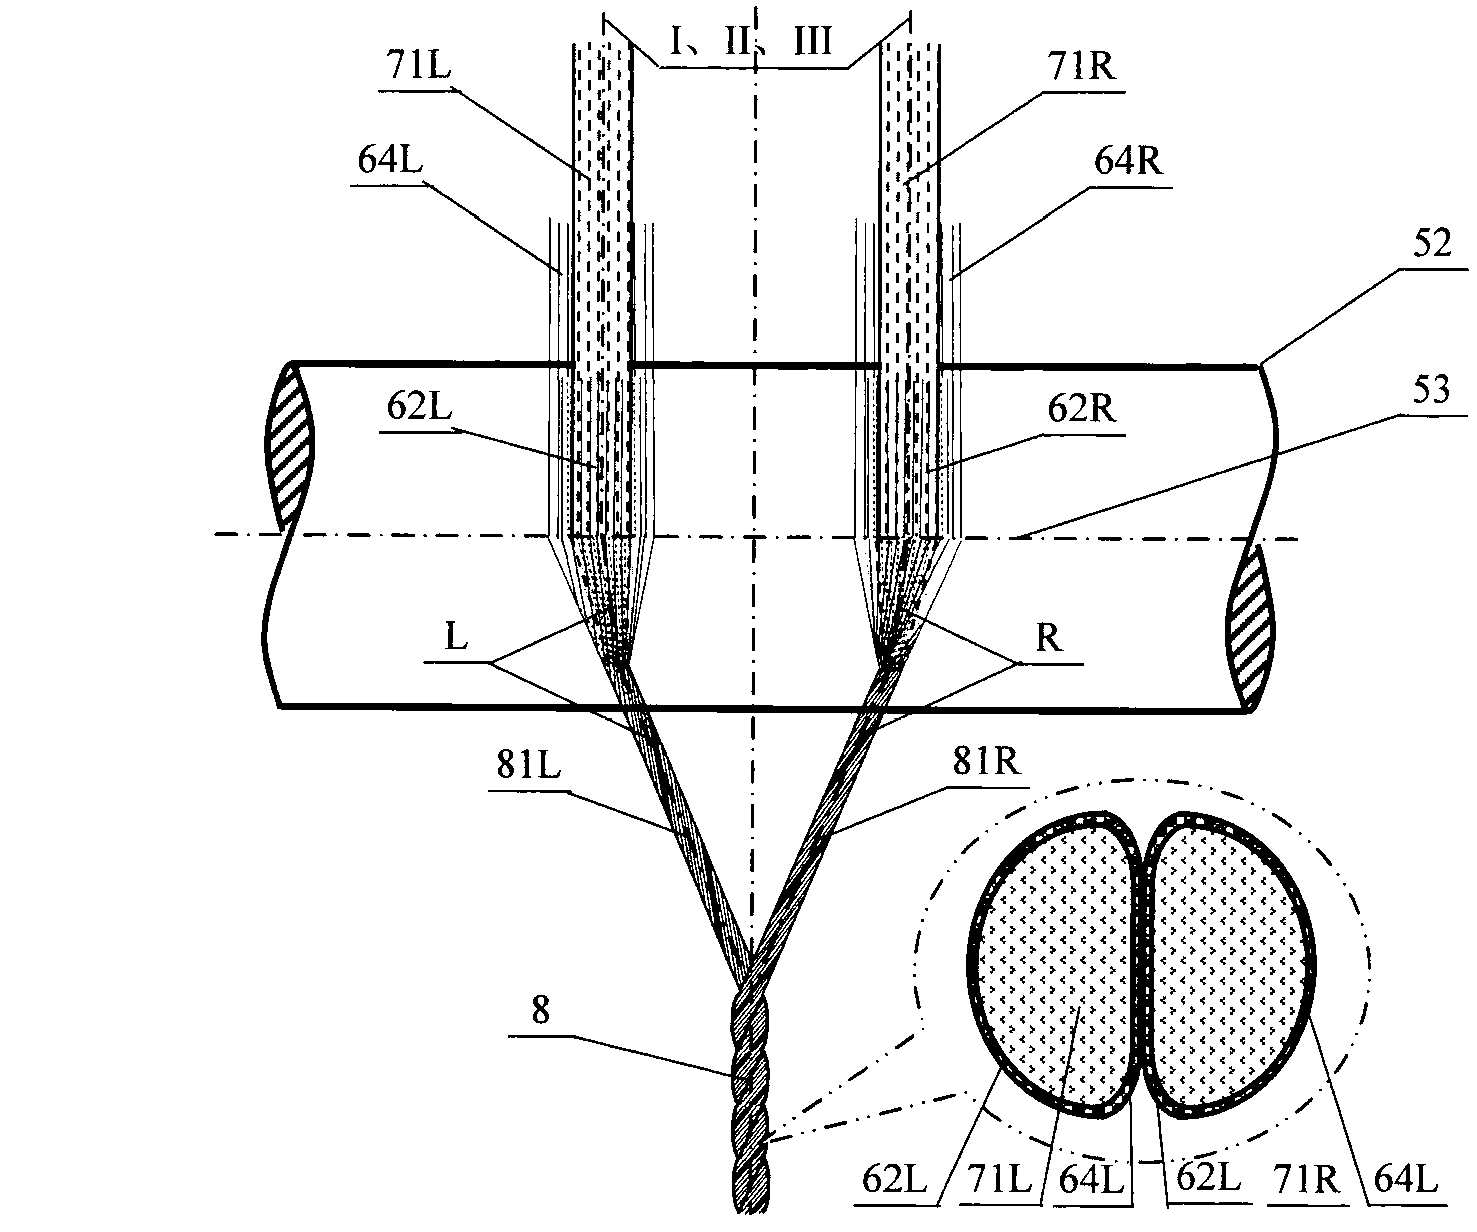 Composite yarn compounded by double yarns through using filament screens to cover downwards and support upwards, spinning method and application